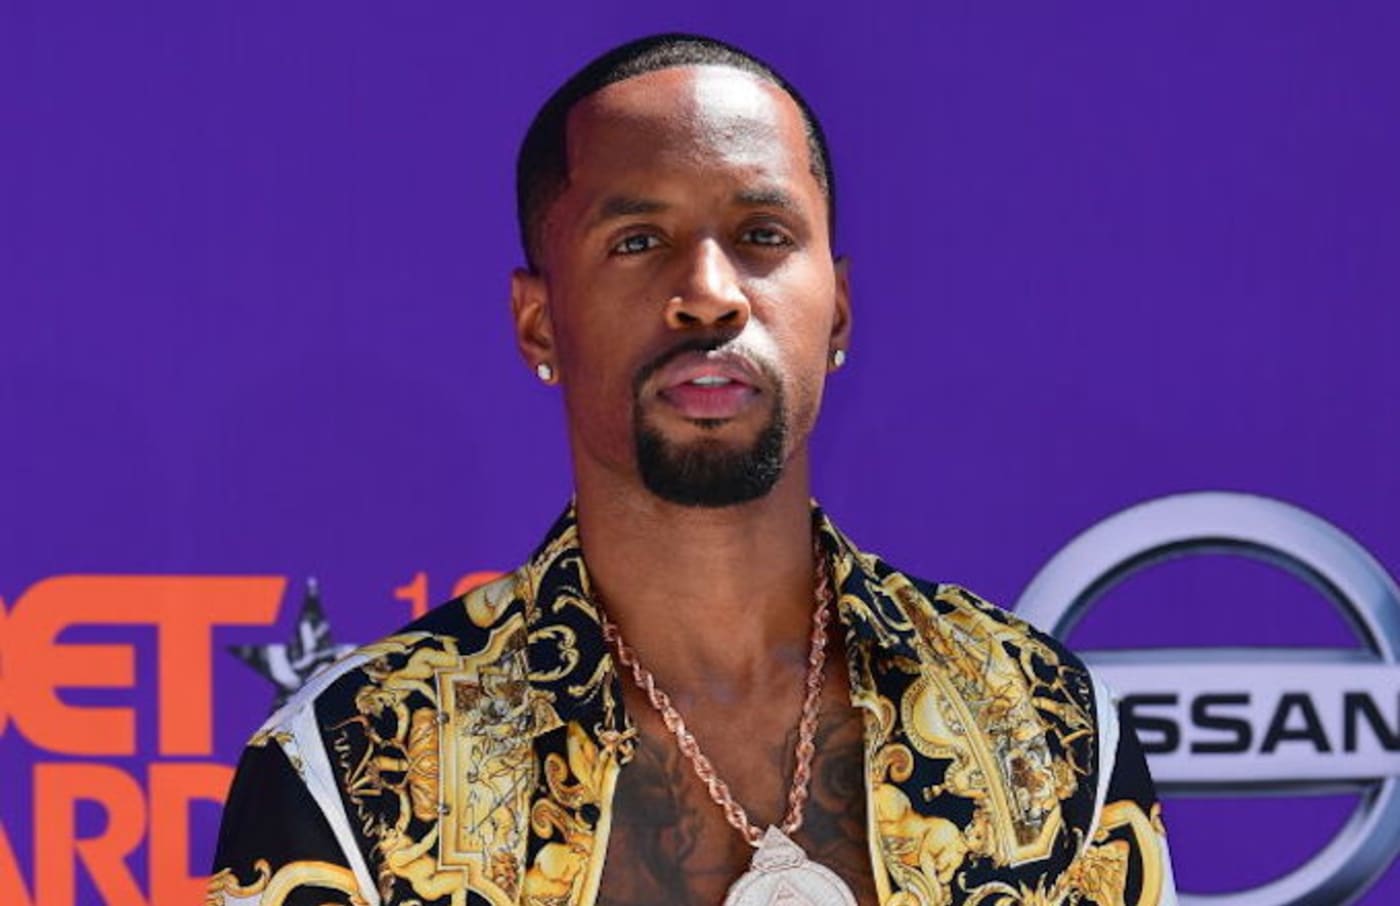 Safaree Performance in NYC Ends With Crowd Throwing Bottles at Him ...